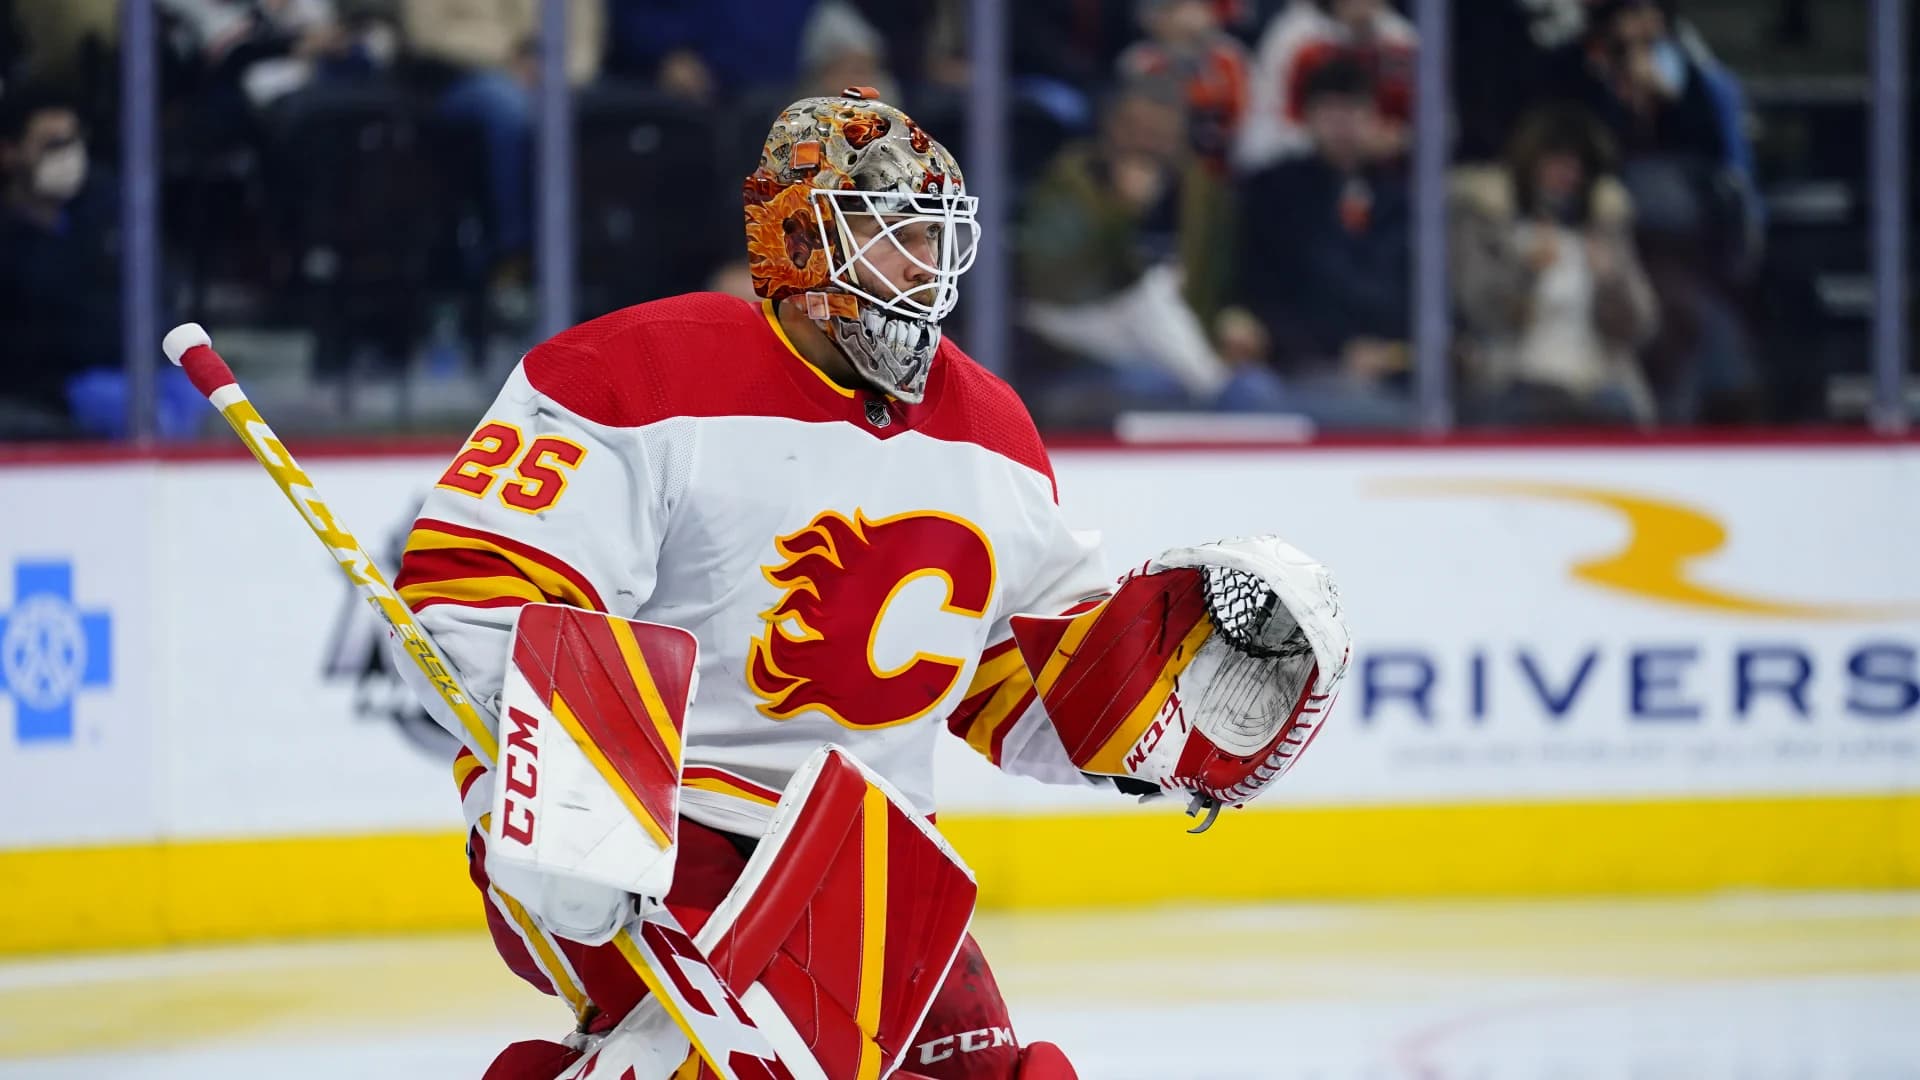 Devils acquire goalie Jacob Markstrom from the Calgary Flames